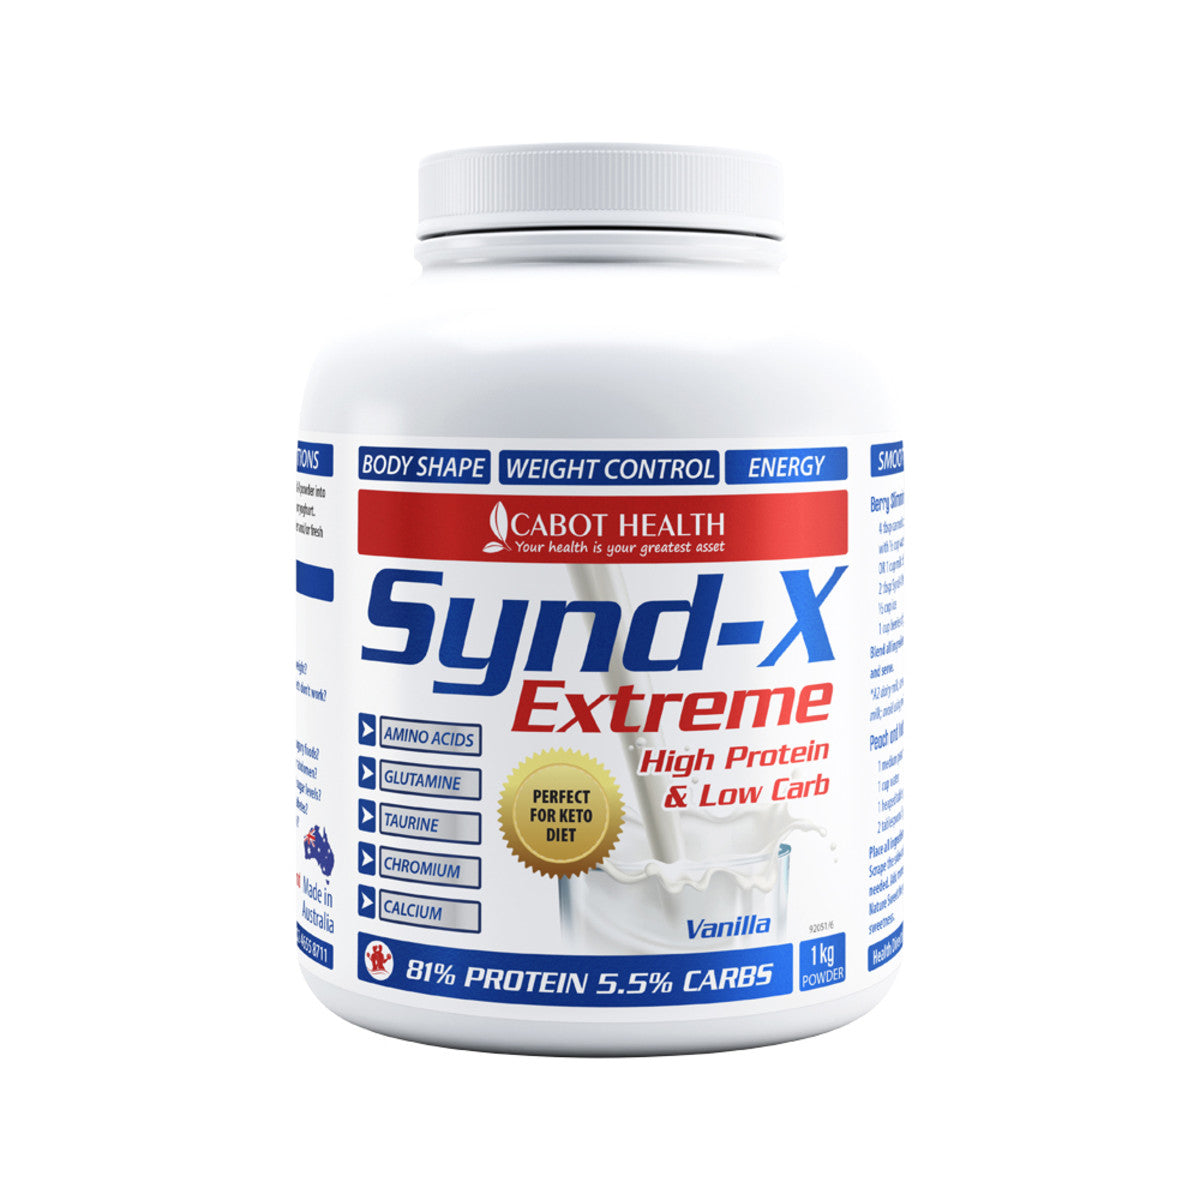 Cabot Health - Synd-X Extreme (Vanilla)